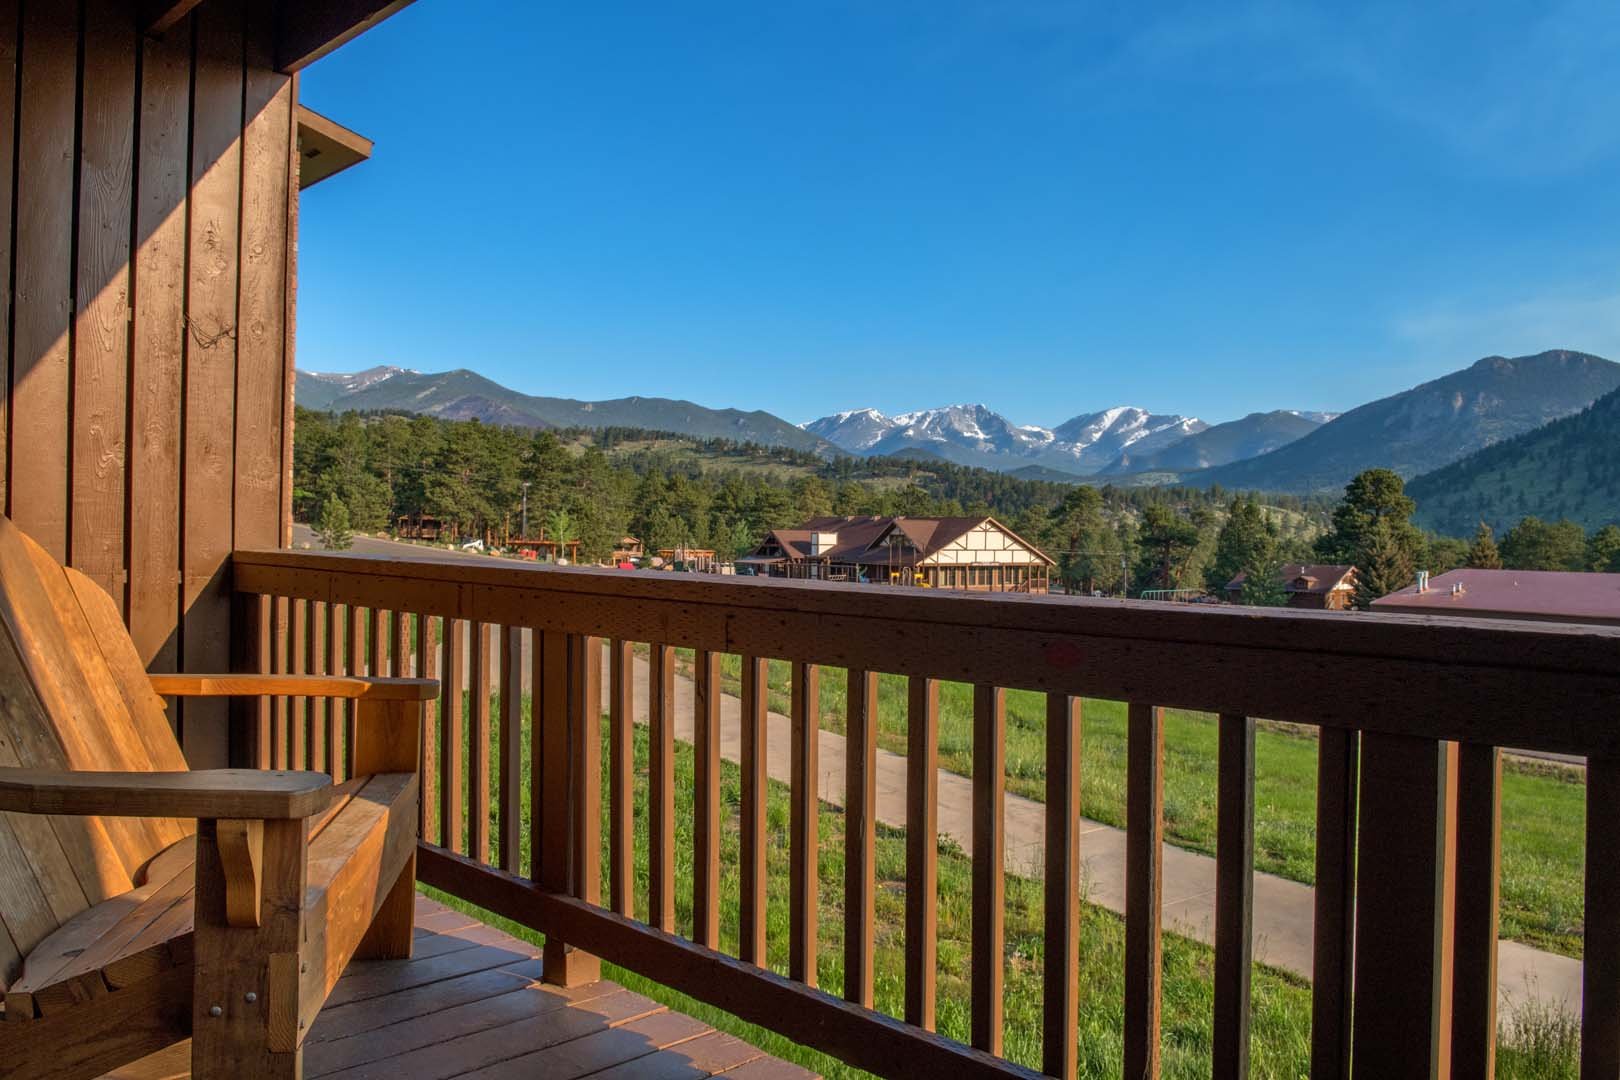 Video from balcony in the lodge style room with view of mountains